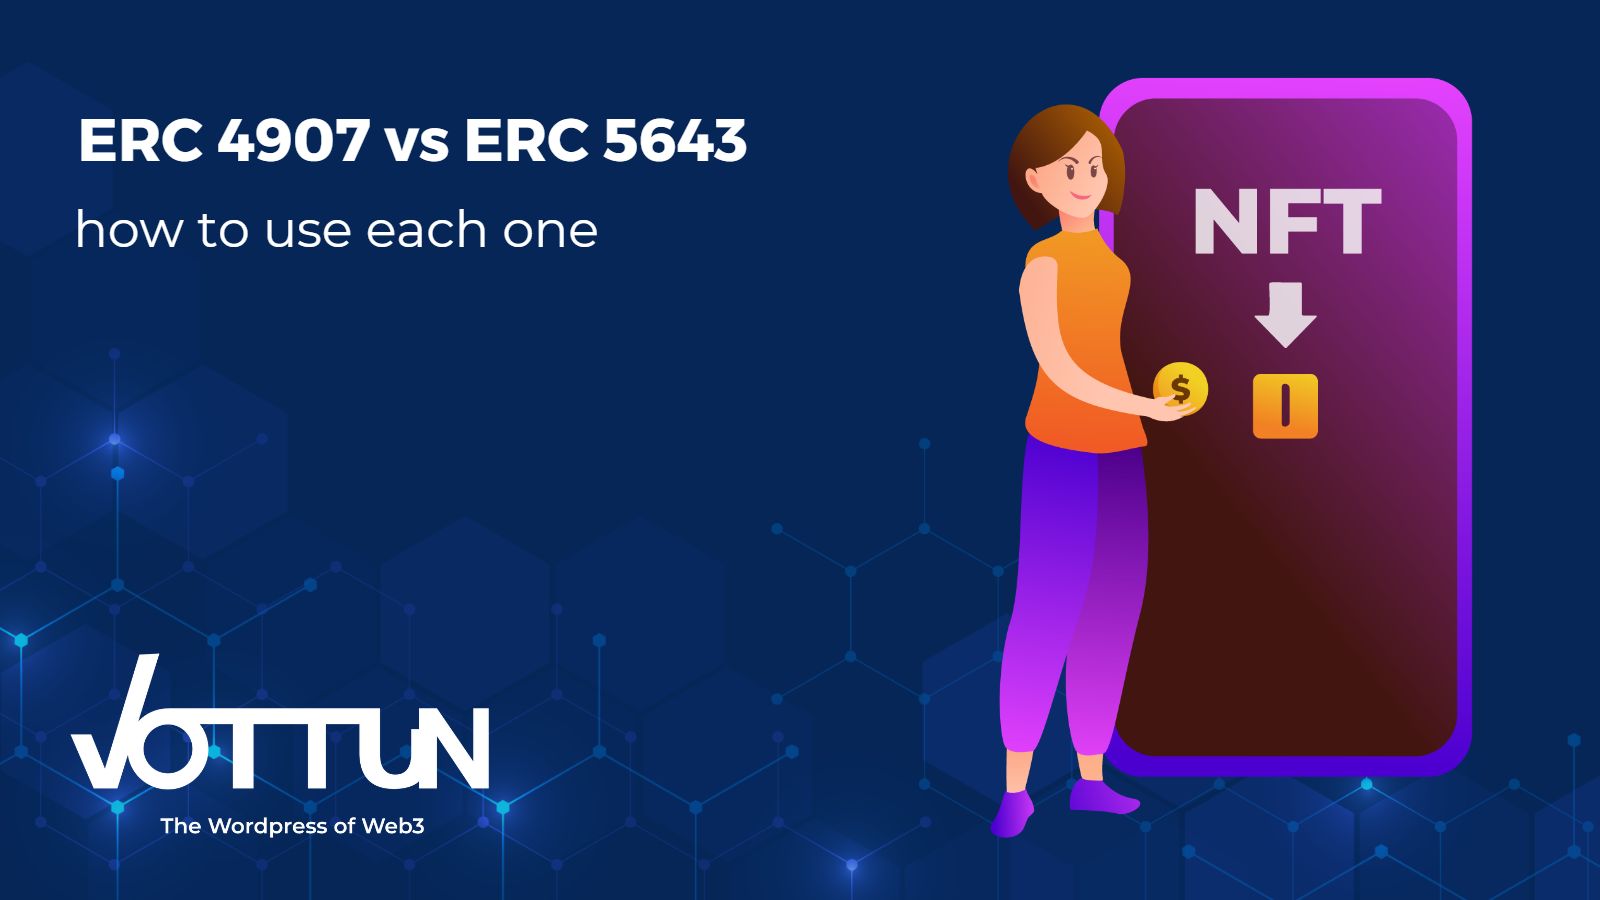 ERC 4907 vs ERC 5643 how to use each one